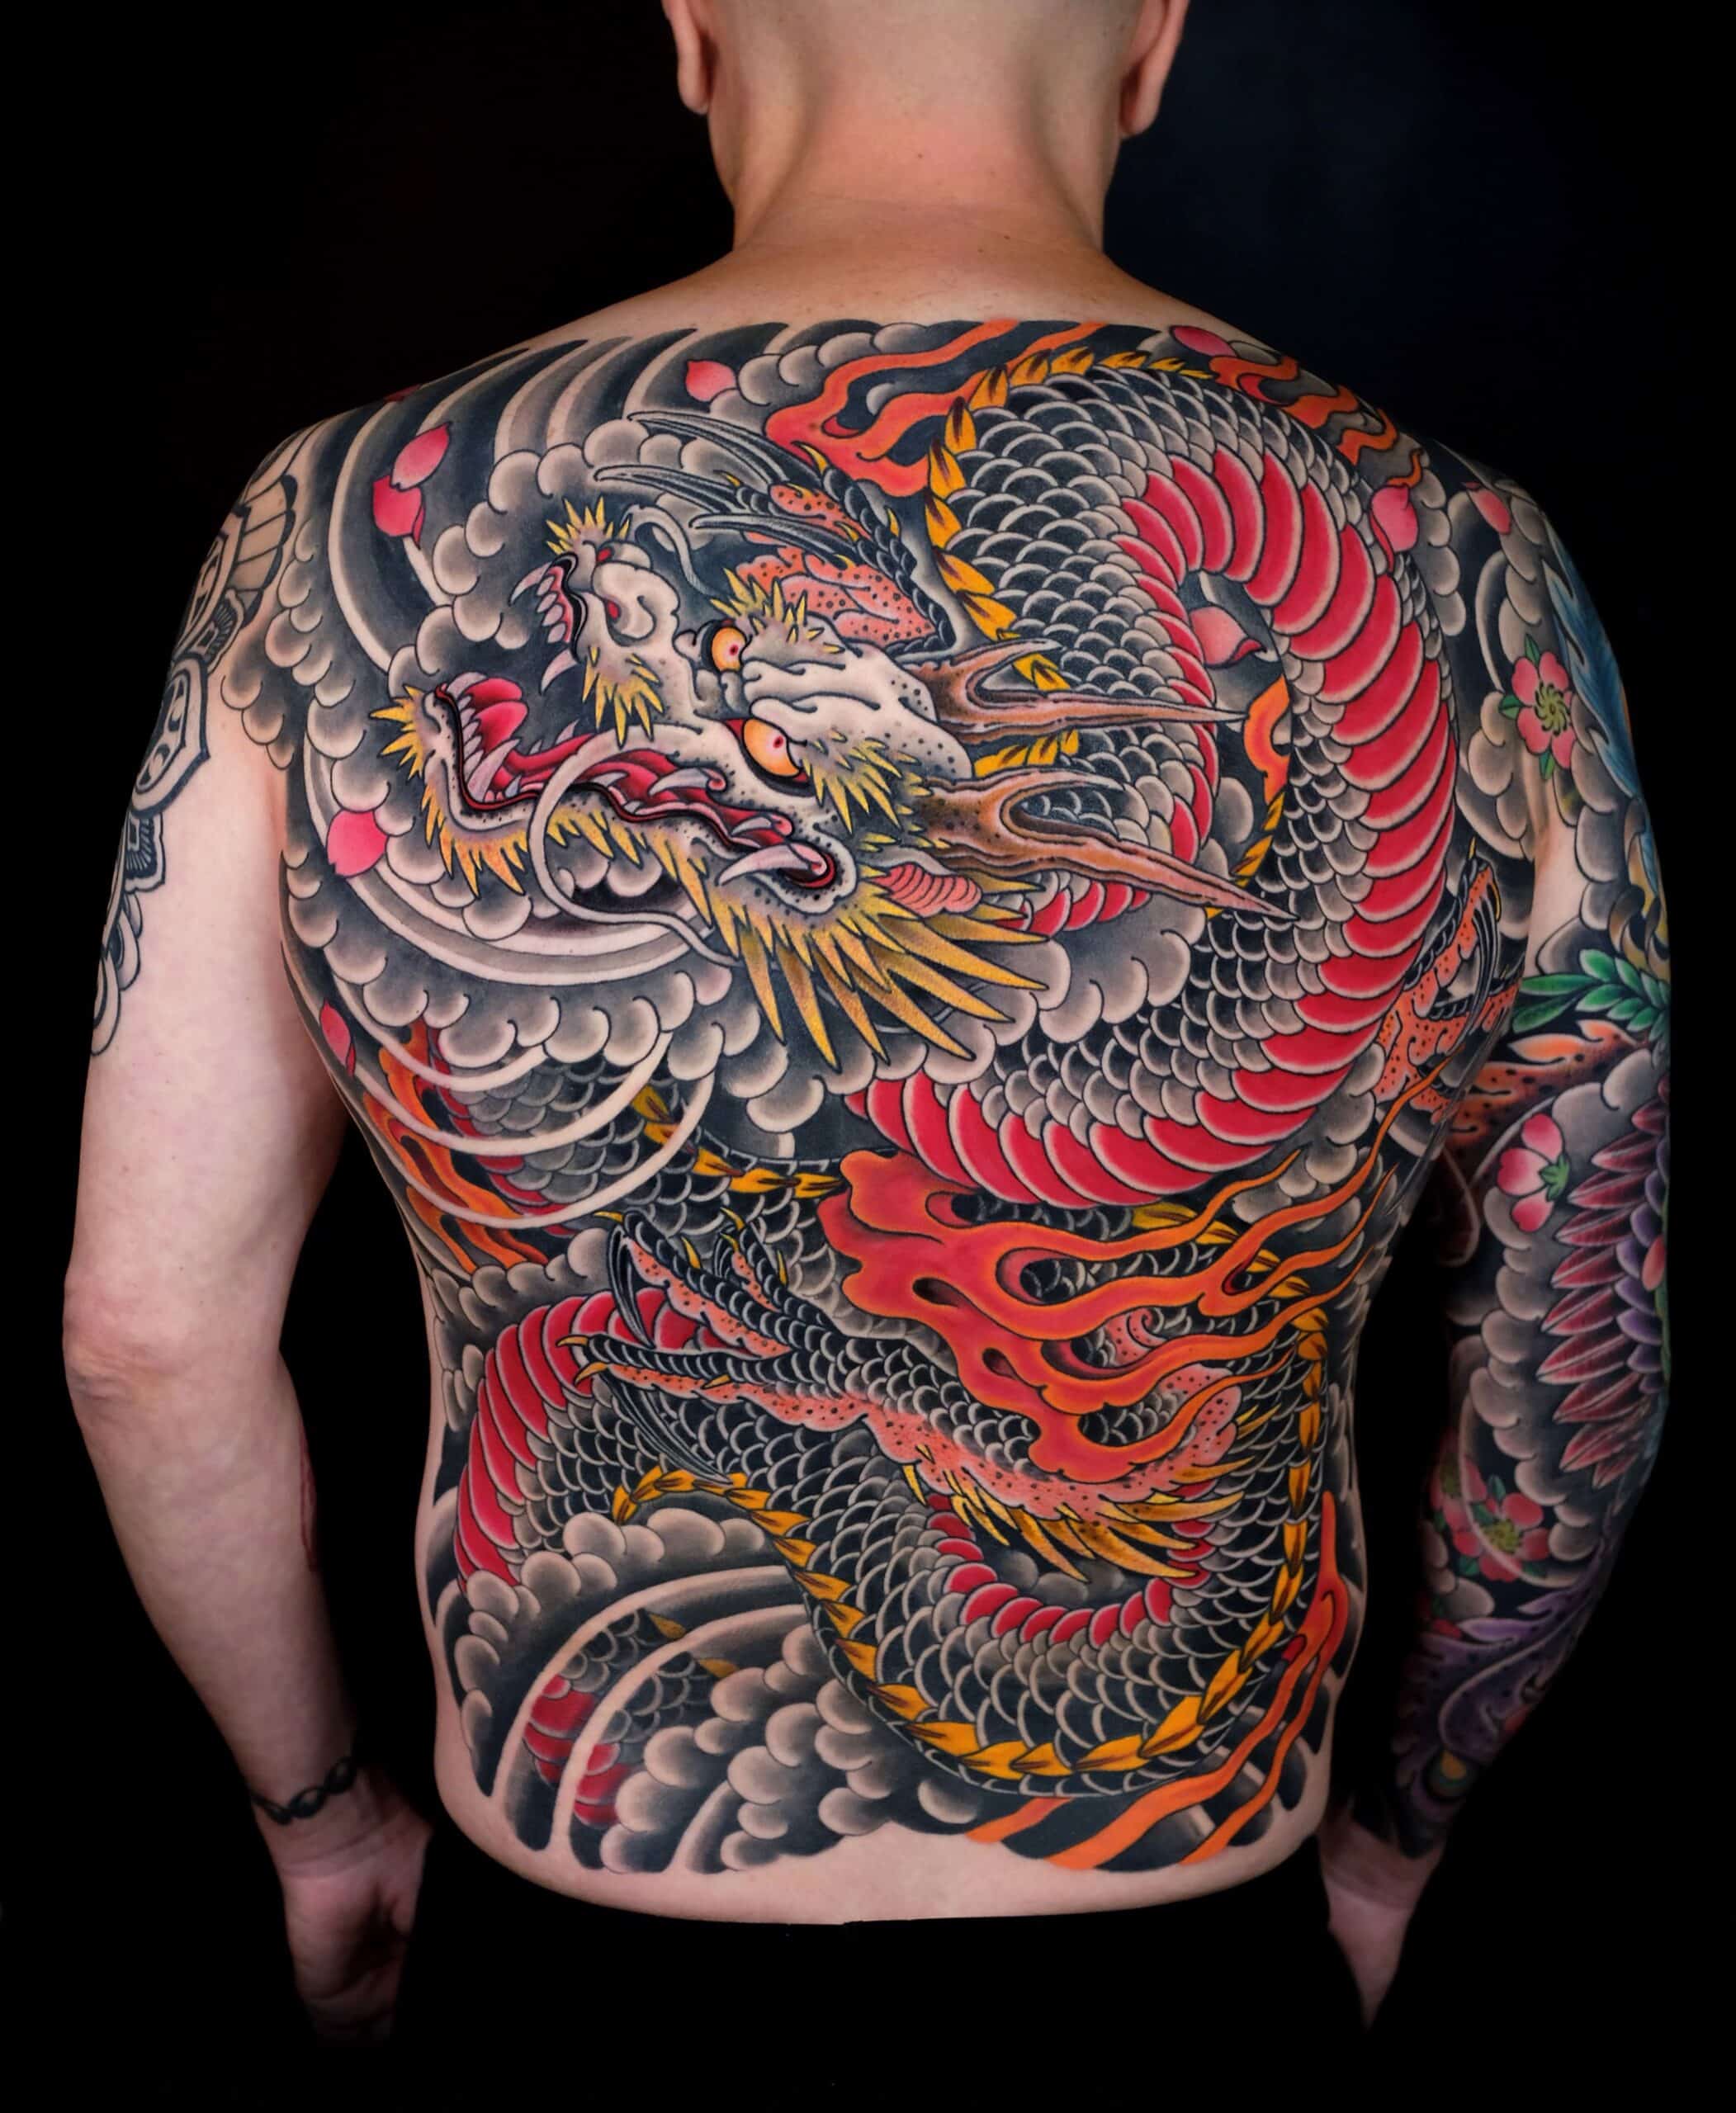 170+ Japanese Dragon Tattoos That Symbolize Your Strength